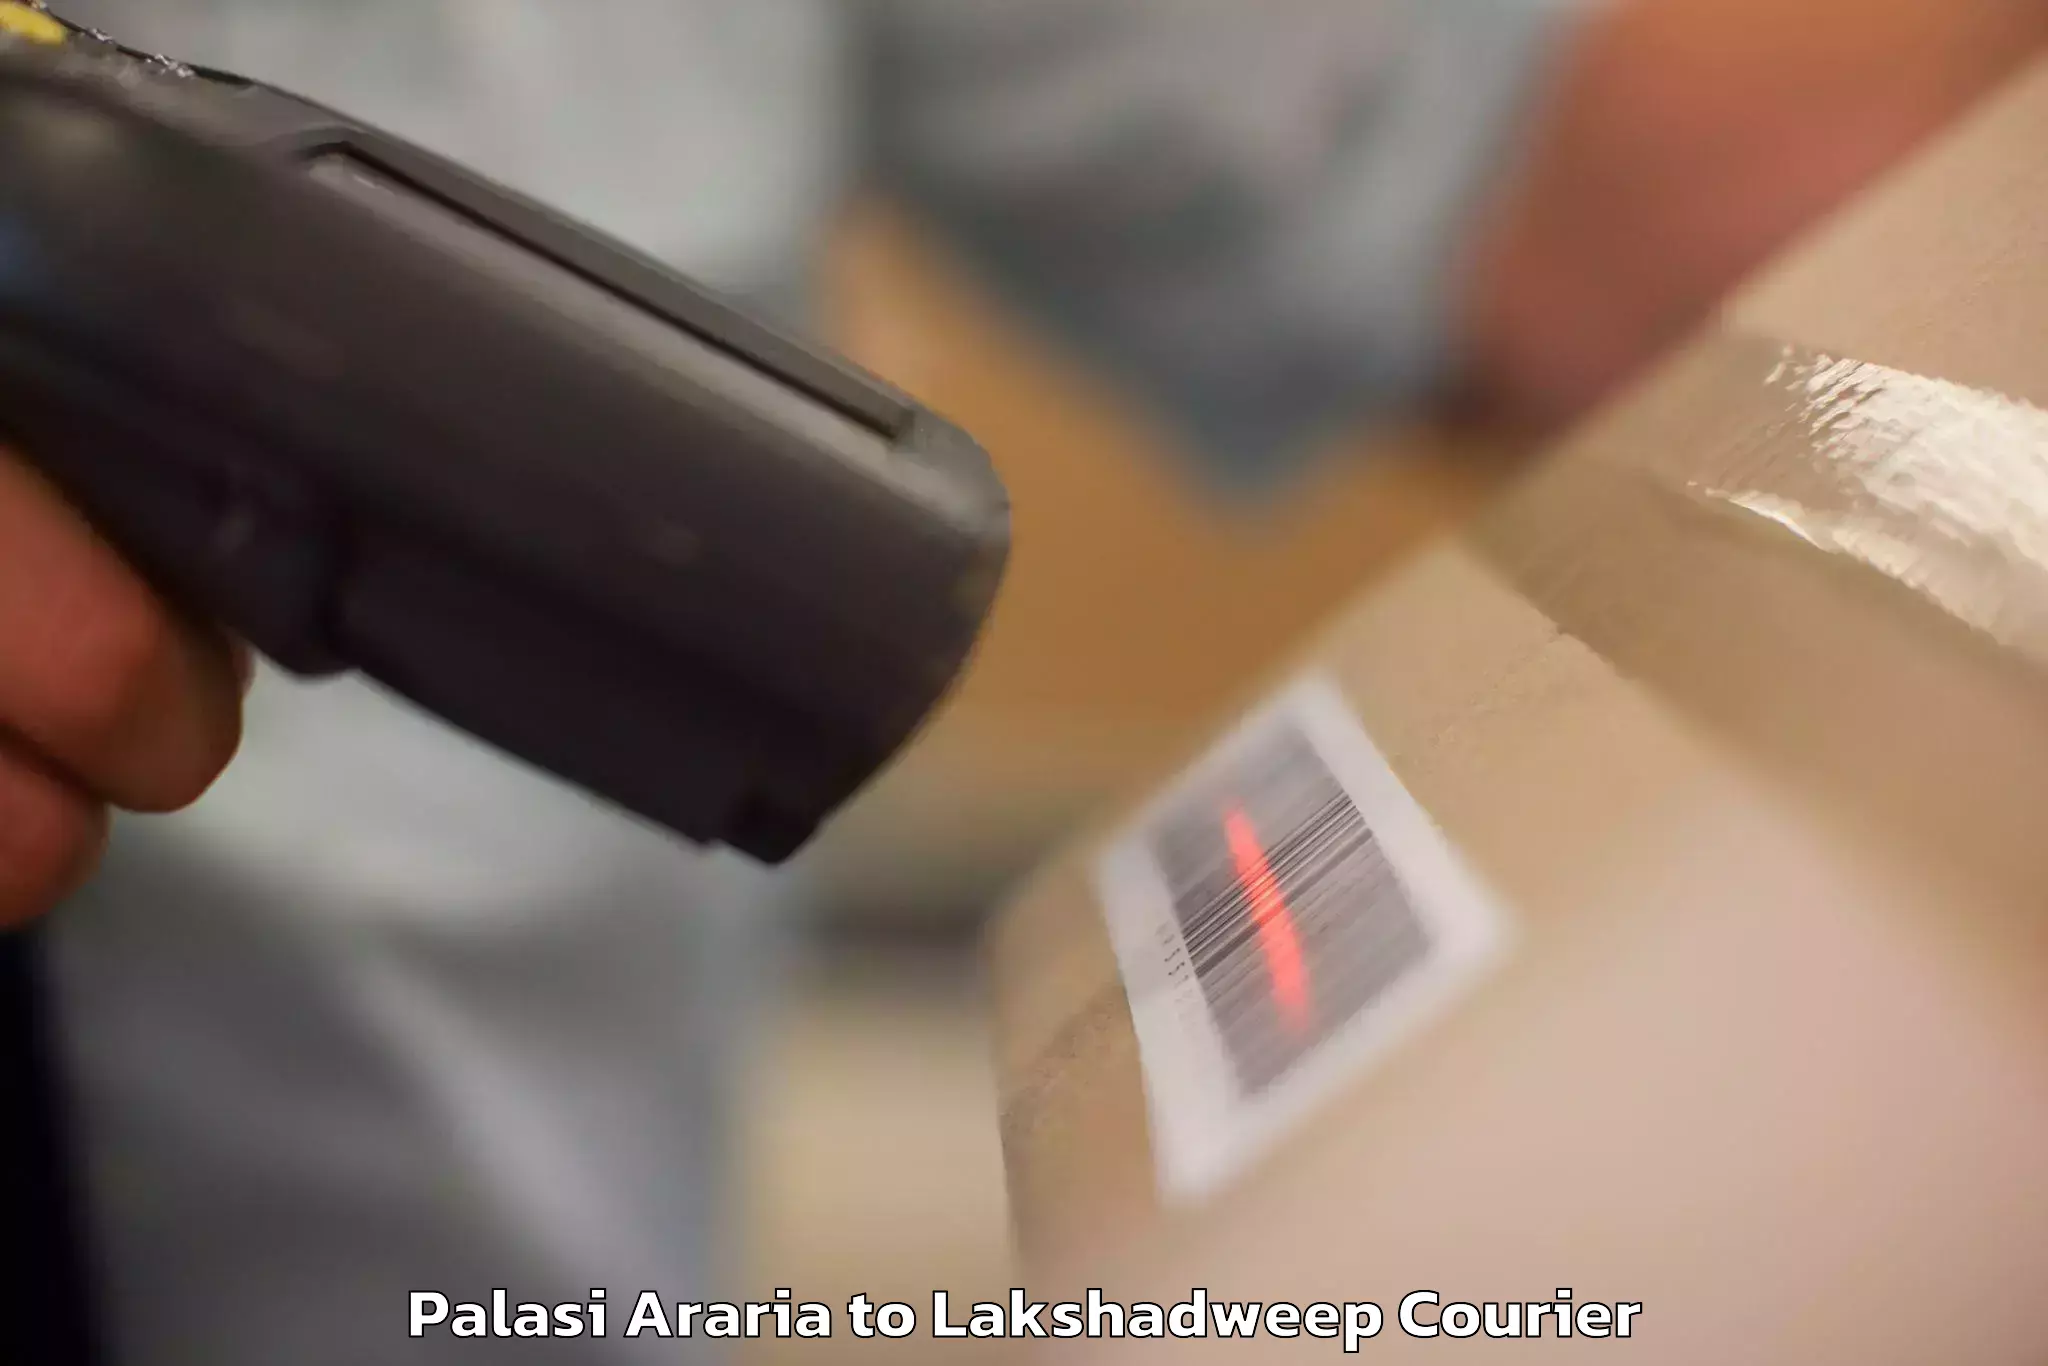 Personal effects shipping in Palasi Araria to Lakshadweep